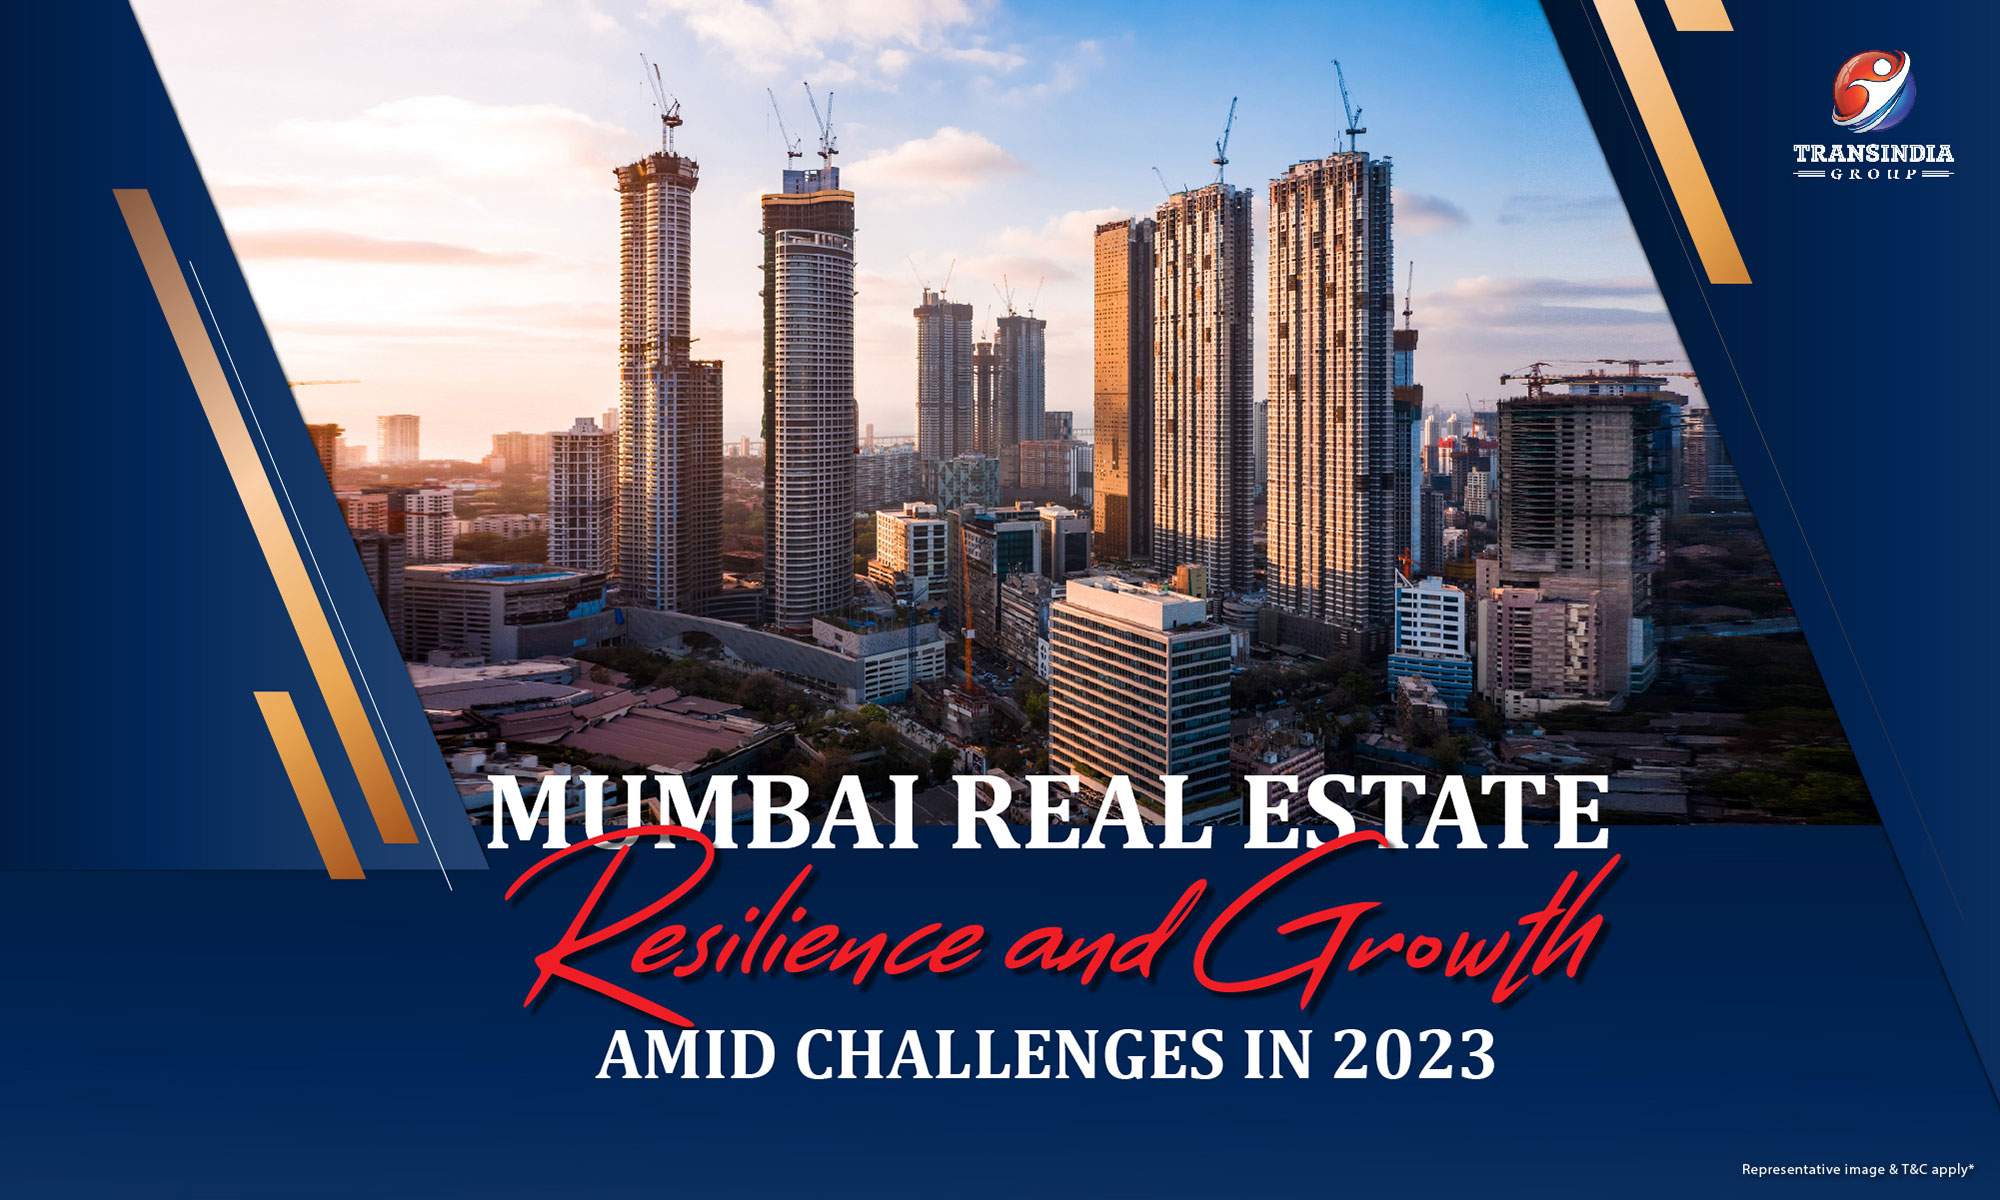 Mumbai Real Estate: Resilience and Growth Amid Challenges in 2023